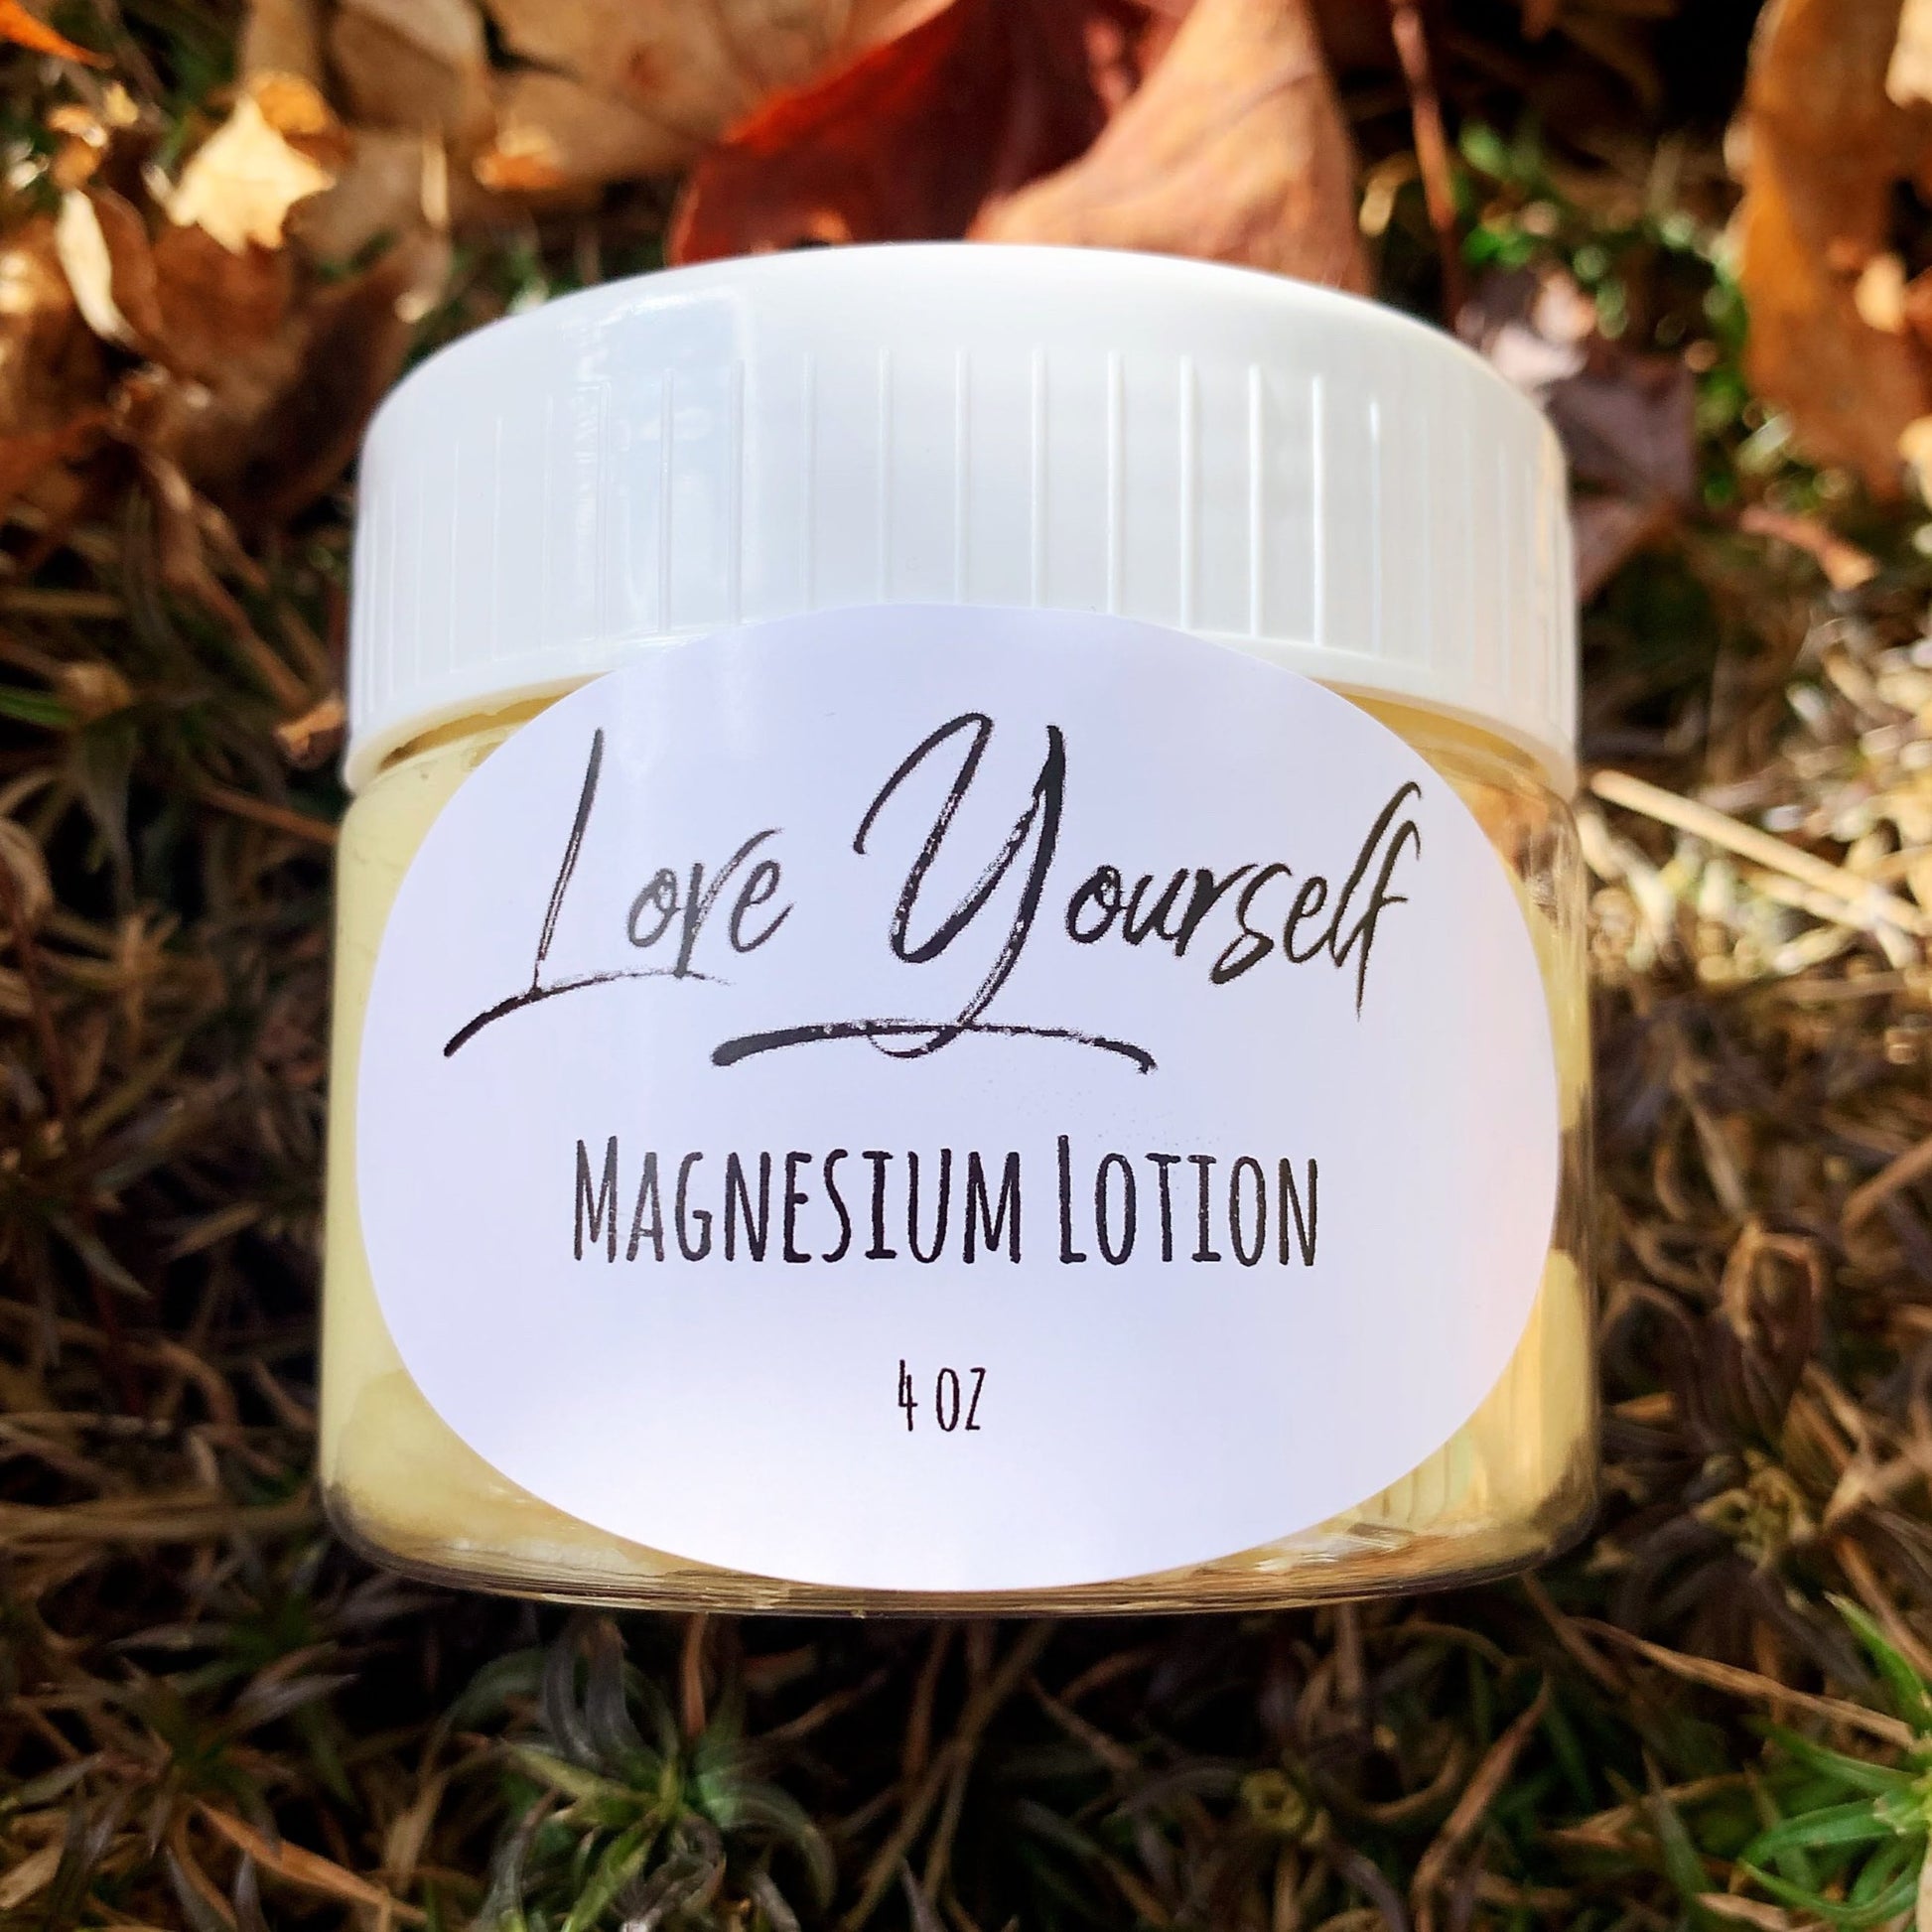 Magnesium Lotion by Love Yourself